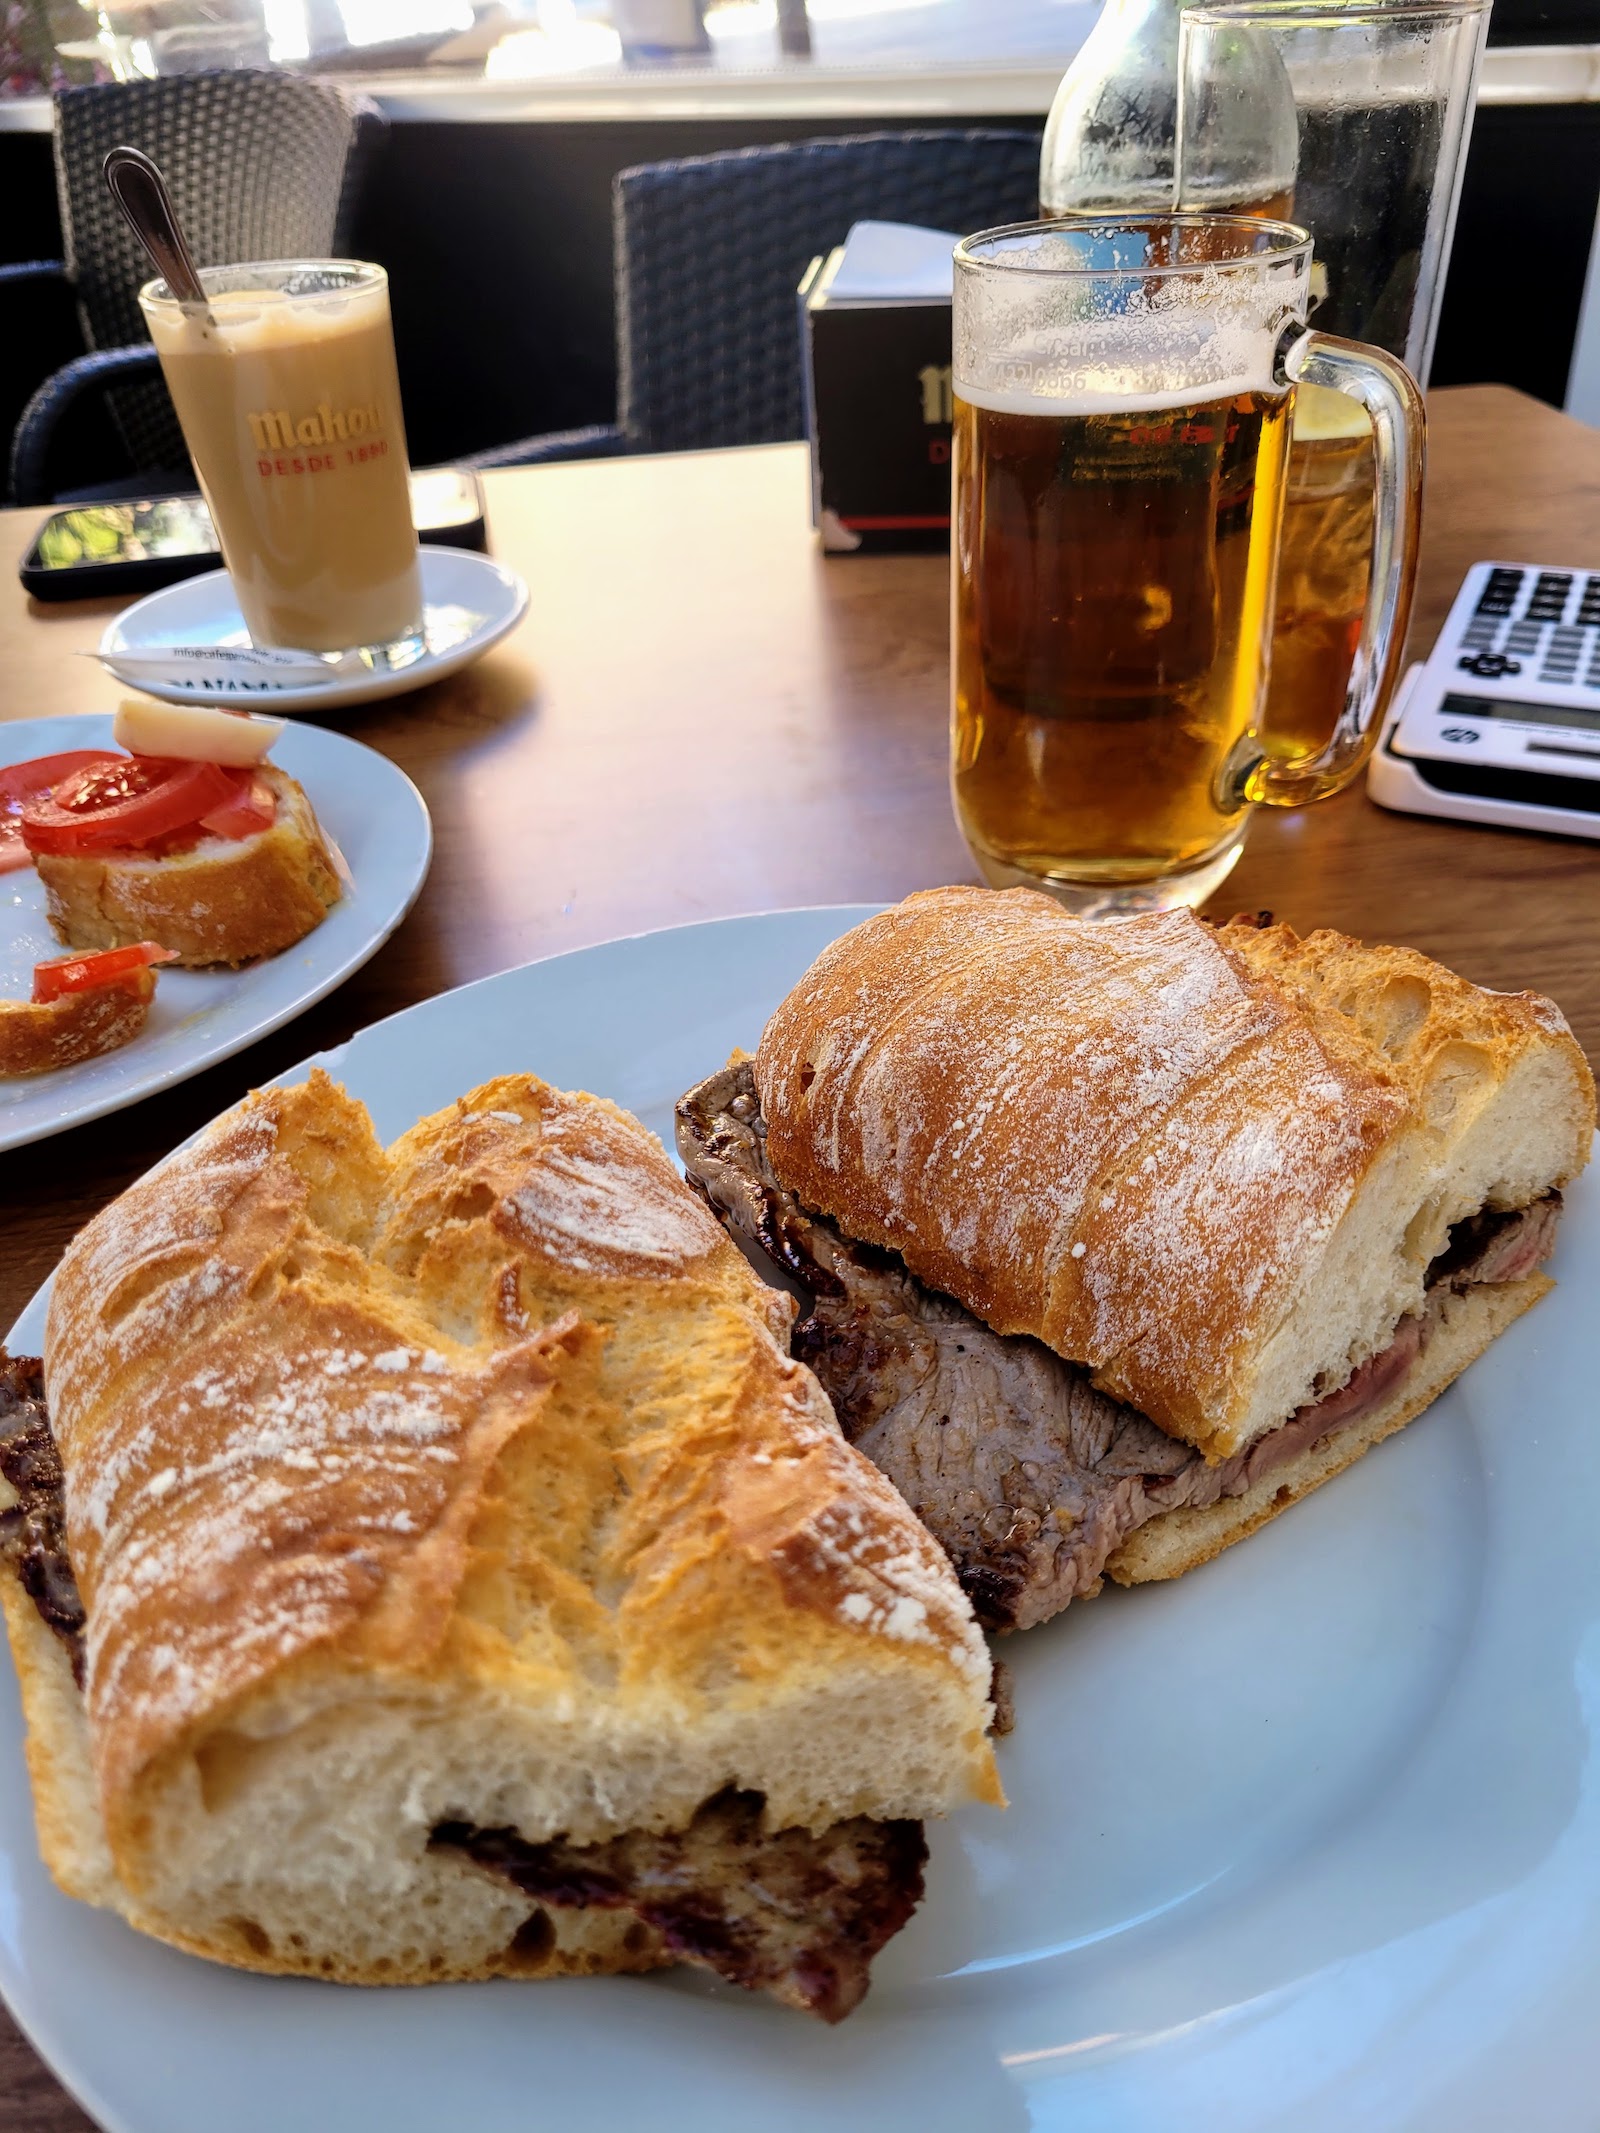 Pepito de ternera served with beer